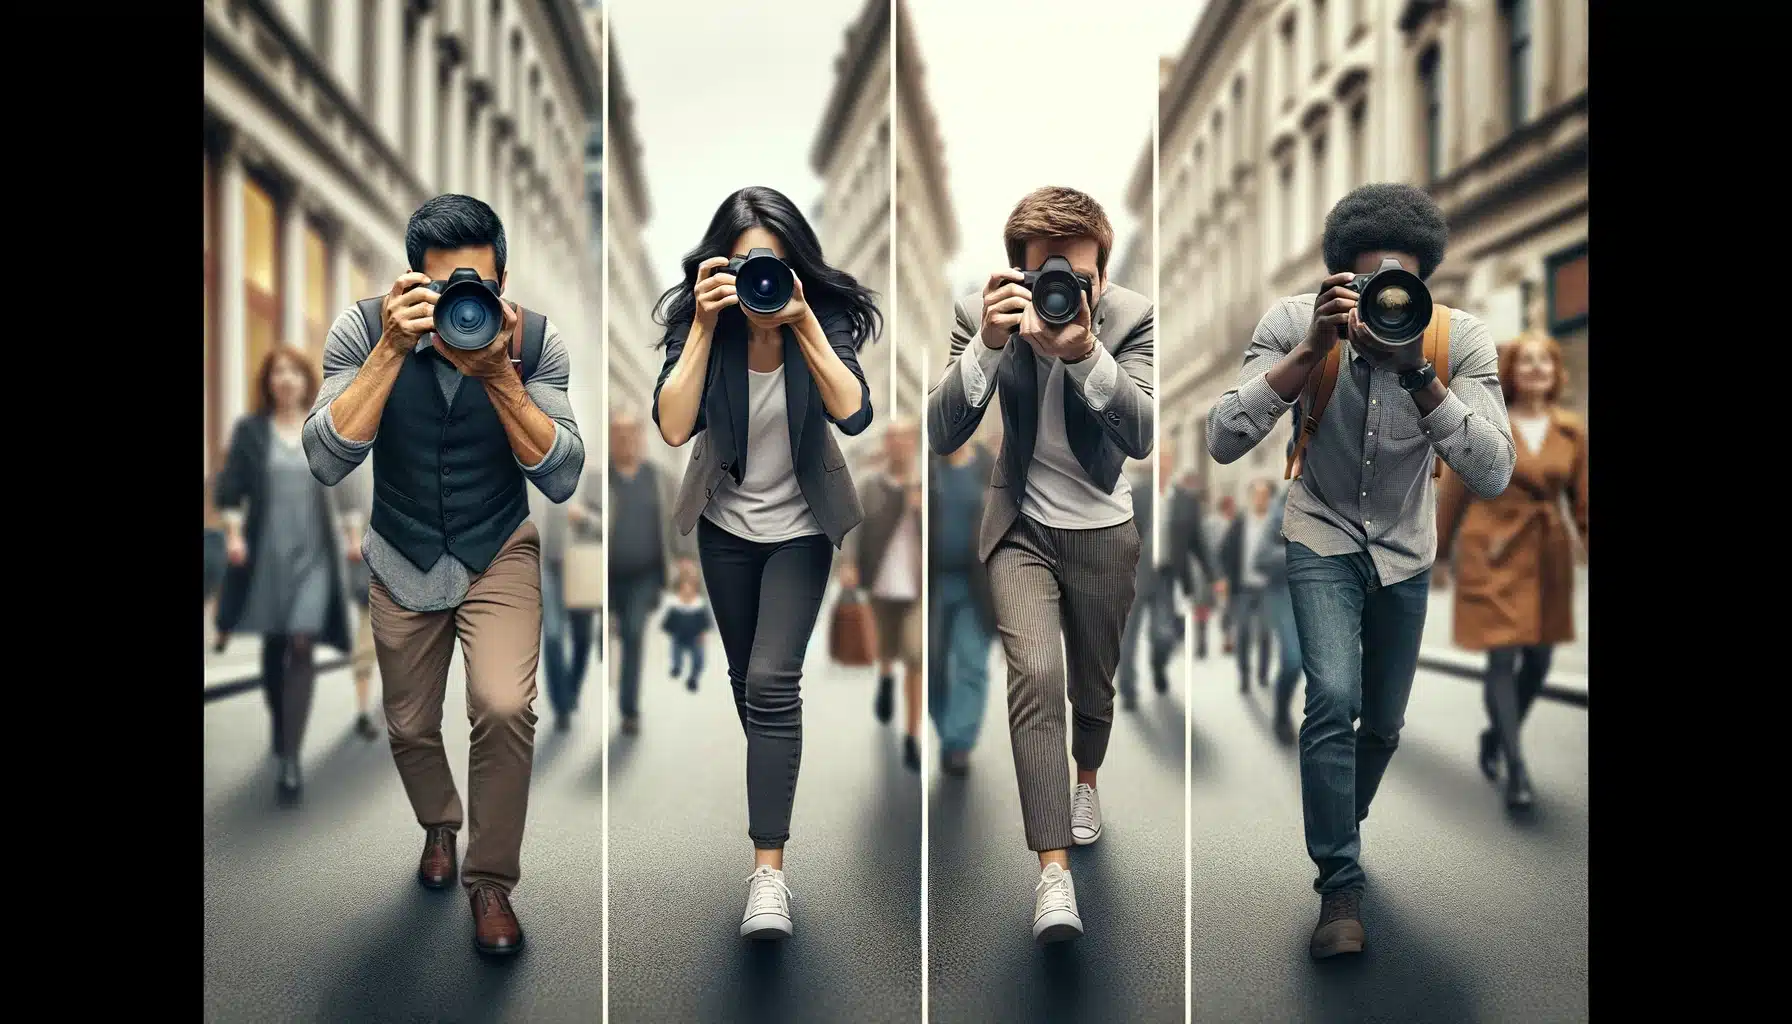 On a busy street, three photographers—a Hispanic female, a Caucasian male, and an African American male—capture images using varied camera settings to demonstrate depth of field, focusing on different distances to showcase focal length, aperture size, and focus depth.